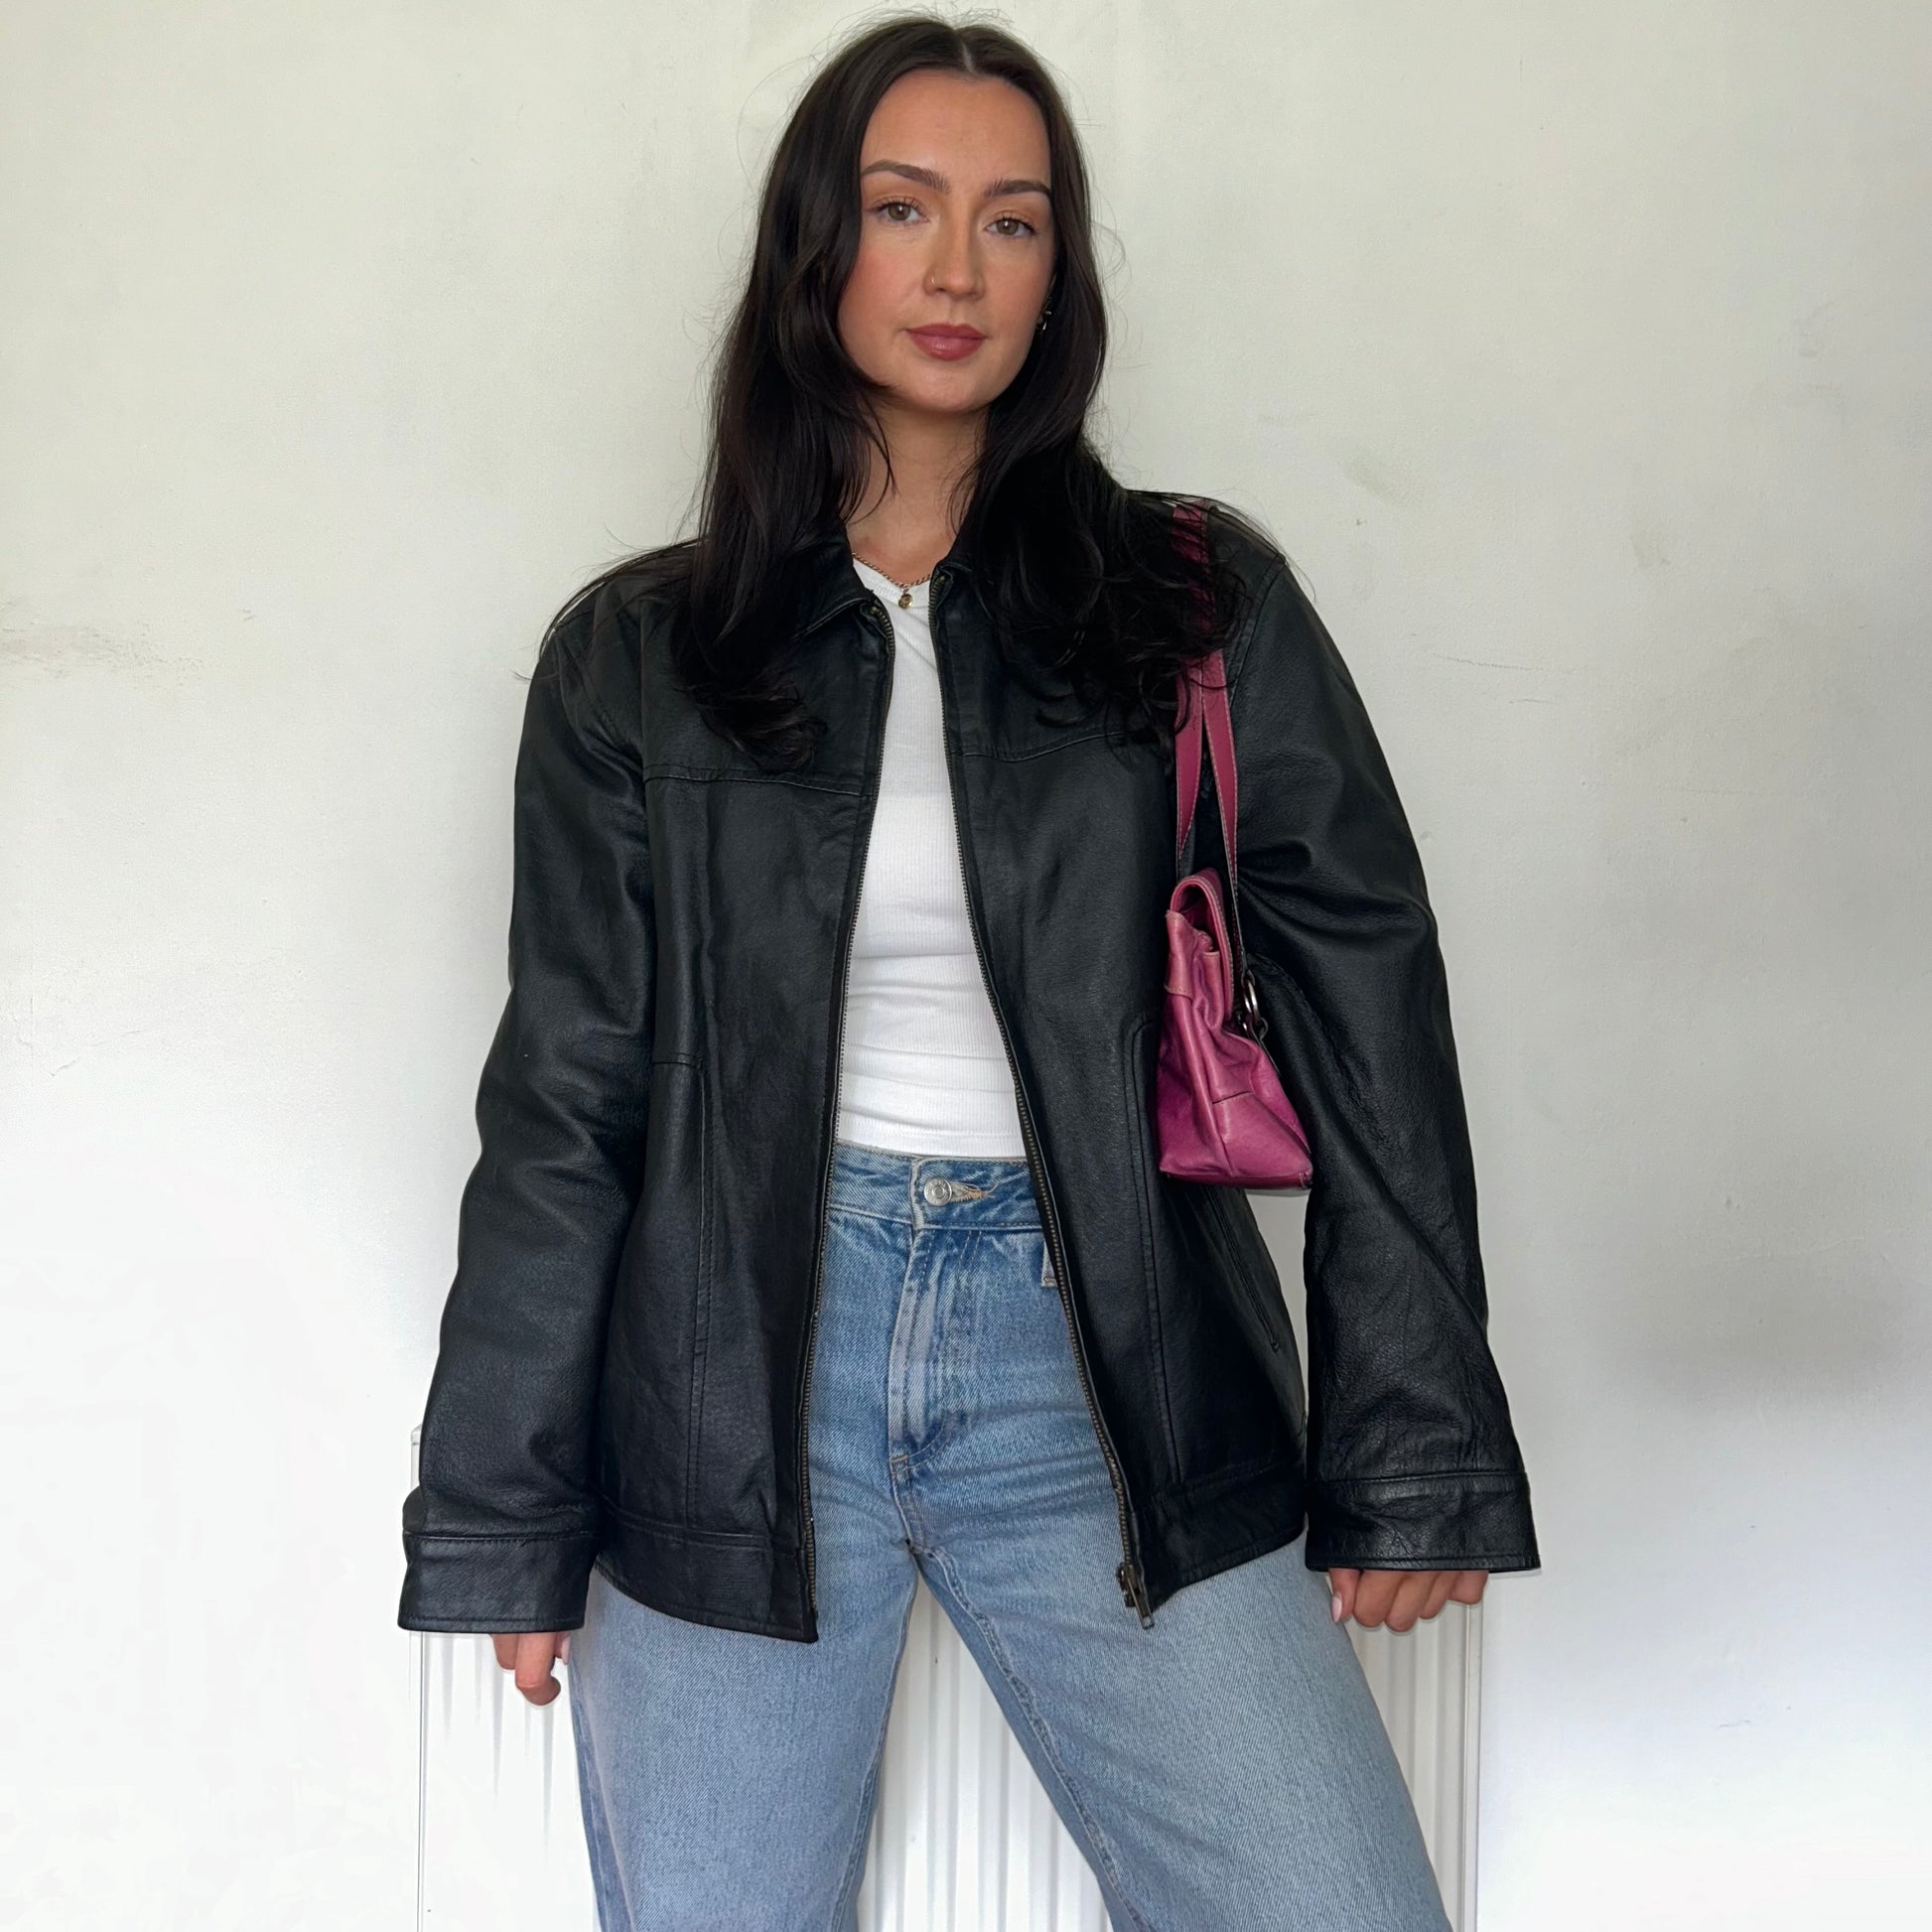 black leather vintage bomber jacket shown on a model wearing a white top and blue jeans with a pink bag